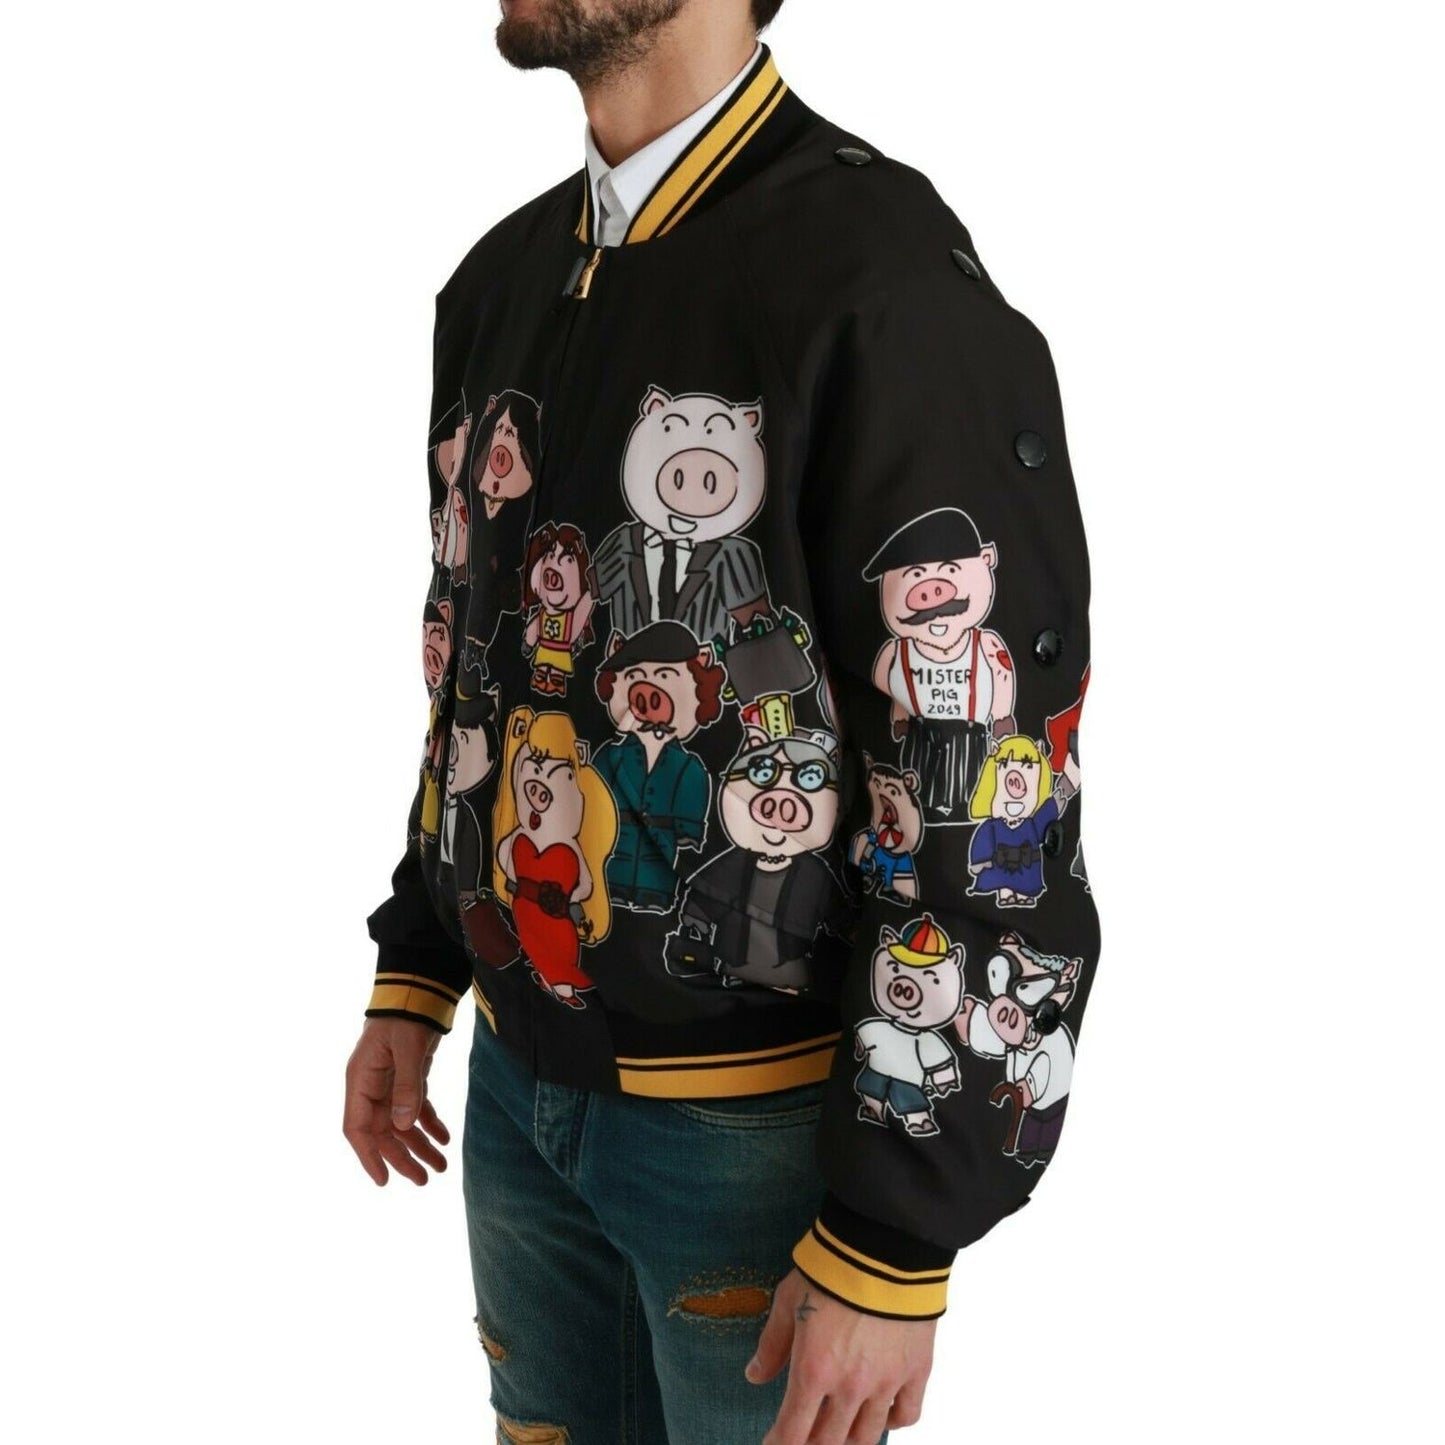 Dolce & Gabbana Black YEAR OF THE PIG Bomber Jacket black-year-of-the-pig-bomber-jacket-1 Coats & Jackets